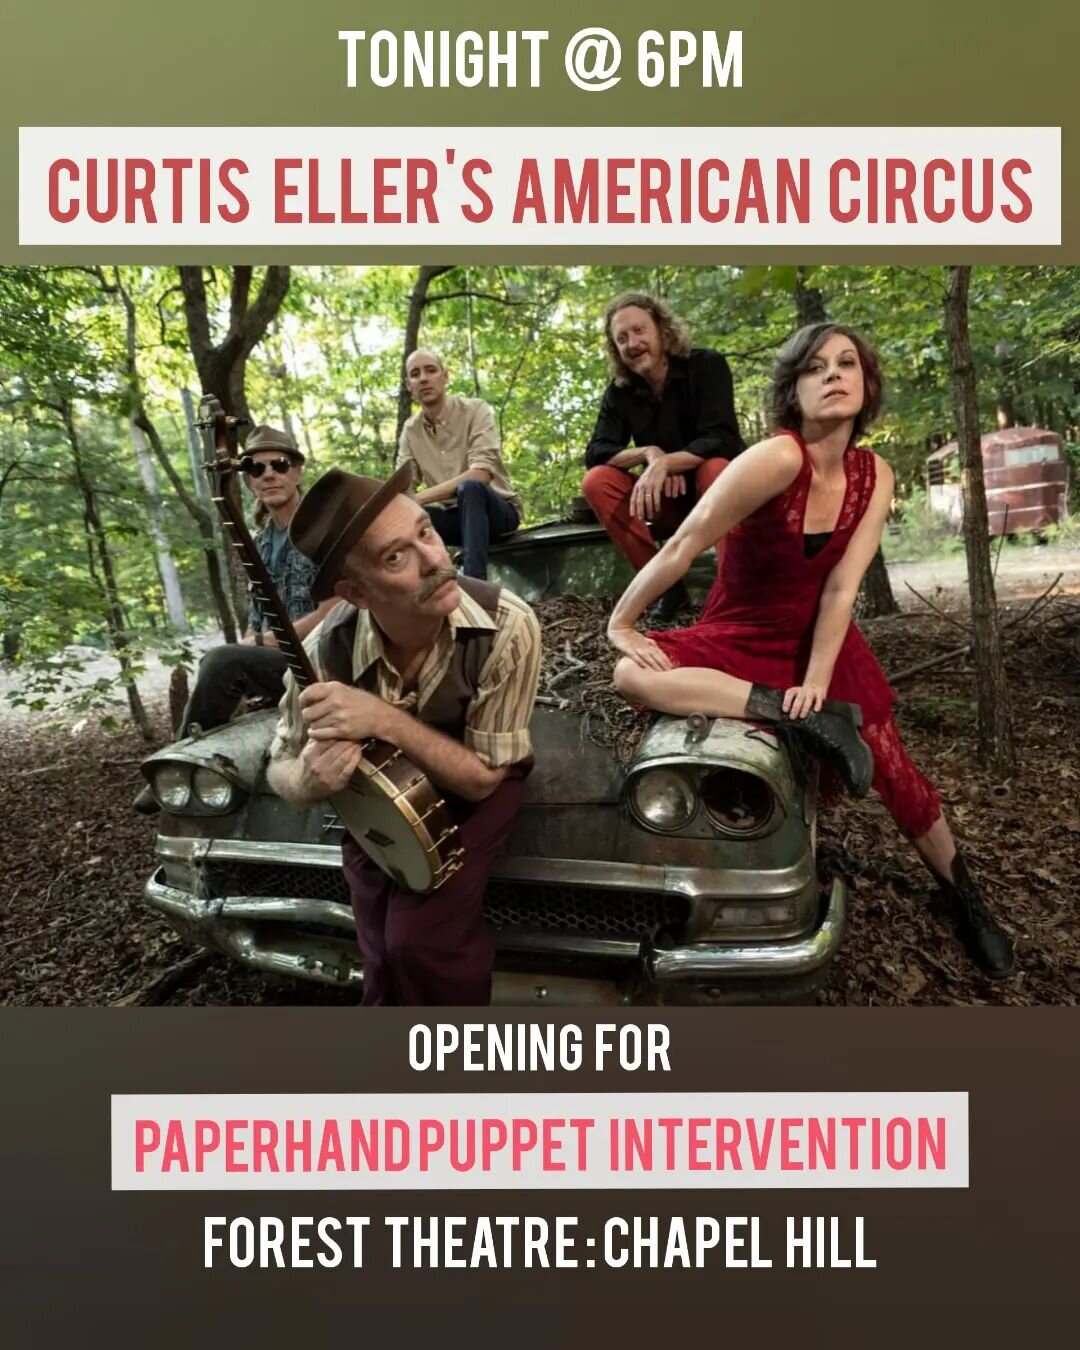 Tonight at 6pm! Curtis Eller's American Circus opens for Paperhand Puppet Intervention at The Forest Theatre in Chapel Hill, NC! 

We're playing a short, stripped down, acoustic set with our friend, Robert Cantrell on bongos!
---
#curtiseller #curtis